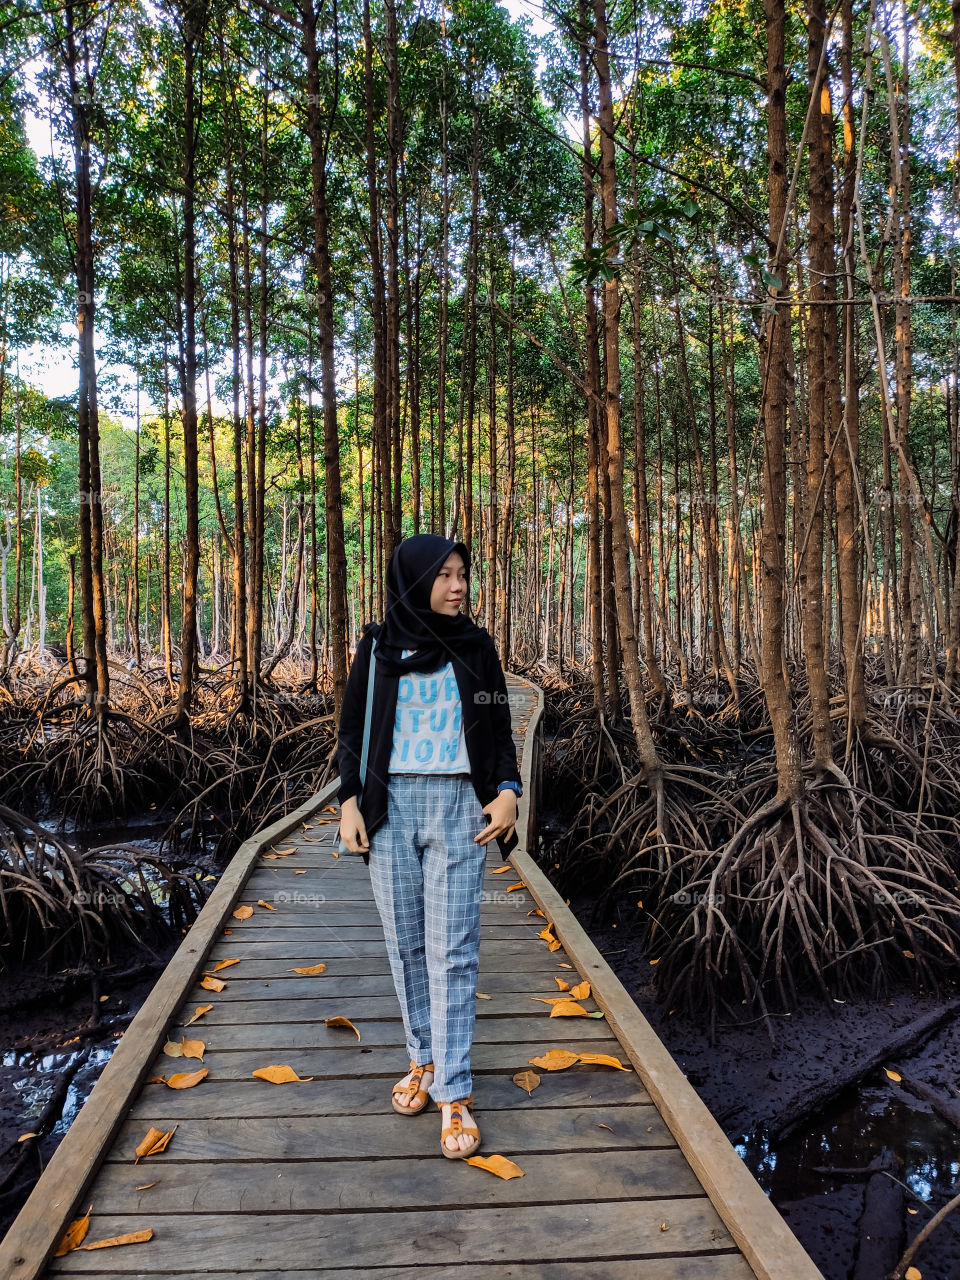 Cool and shady atmosphere in the mangrove forest